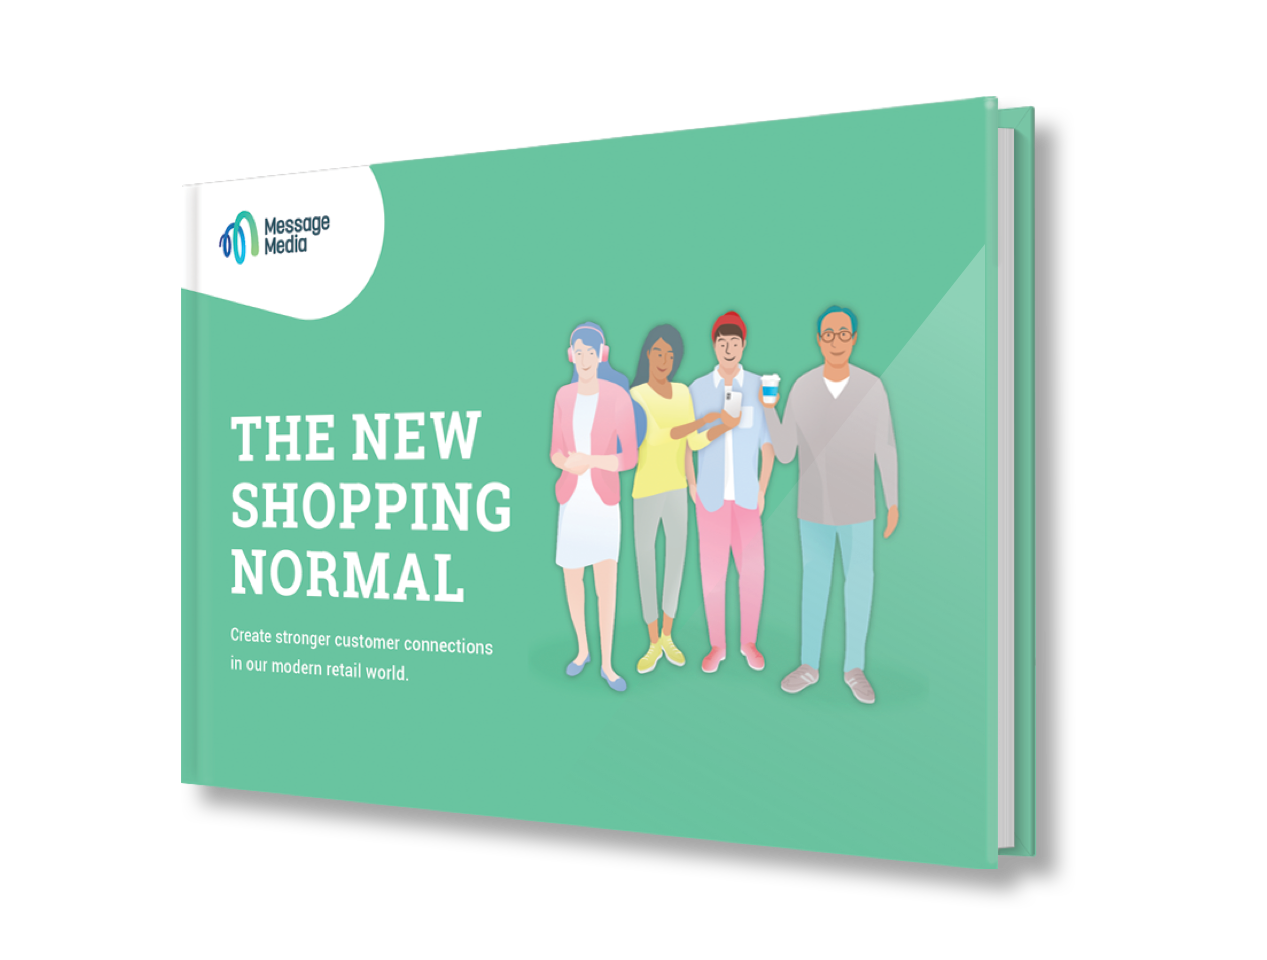 Image for Get to know the new shopping normal